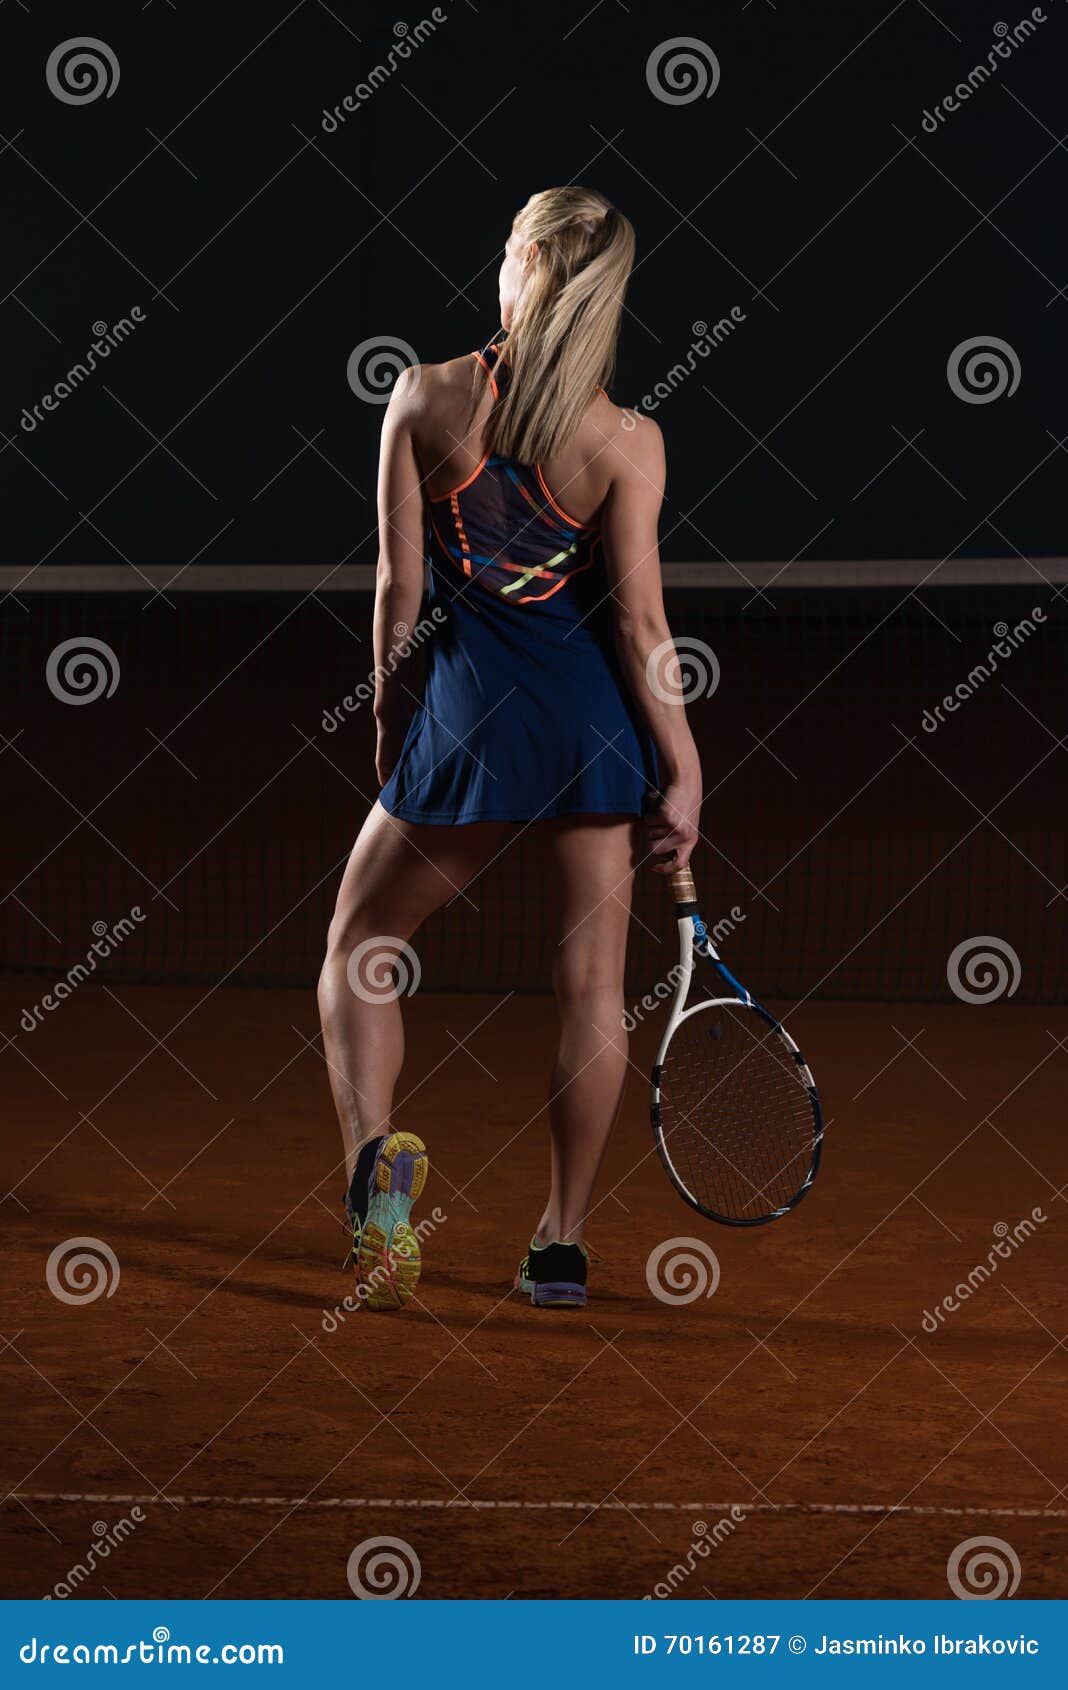 back view of young fit tennis player